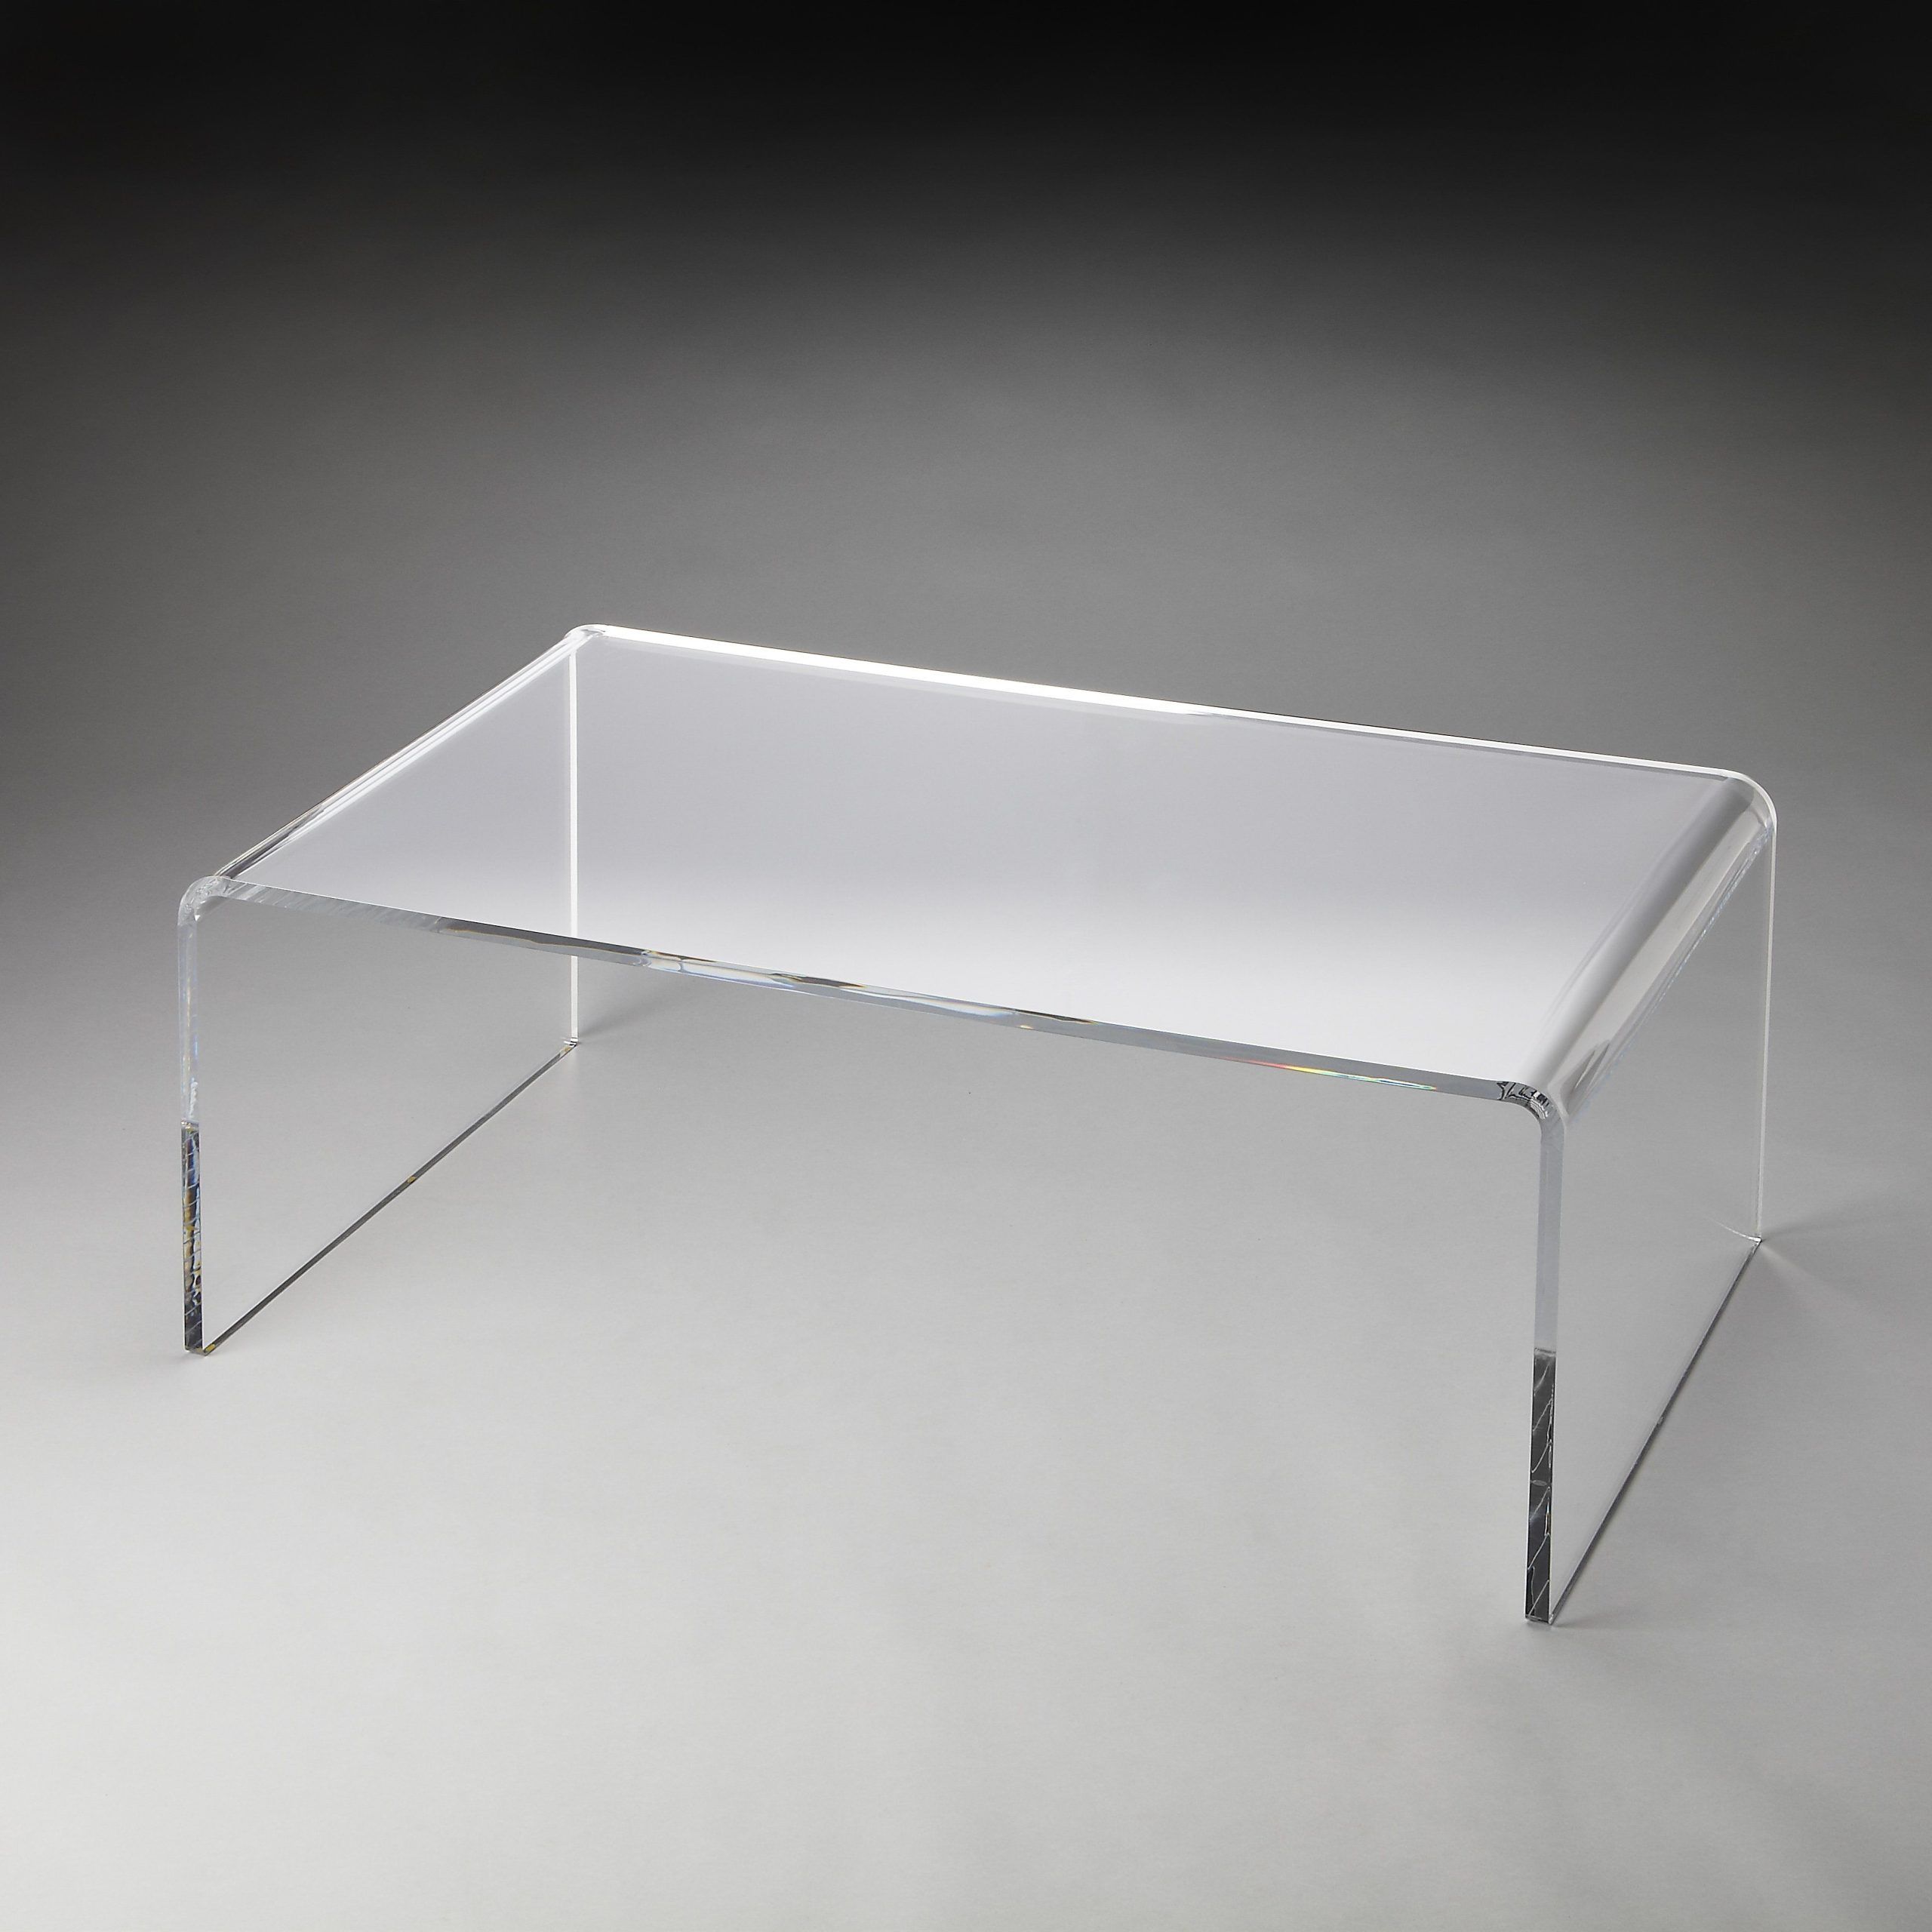 Crystal Clear Acrylic Coffee Table | Acrylic Coffee Table, Sleek Coffee Throughout Clear Rectangle Center Coffee Tables (View 13 of 20)